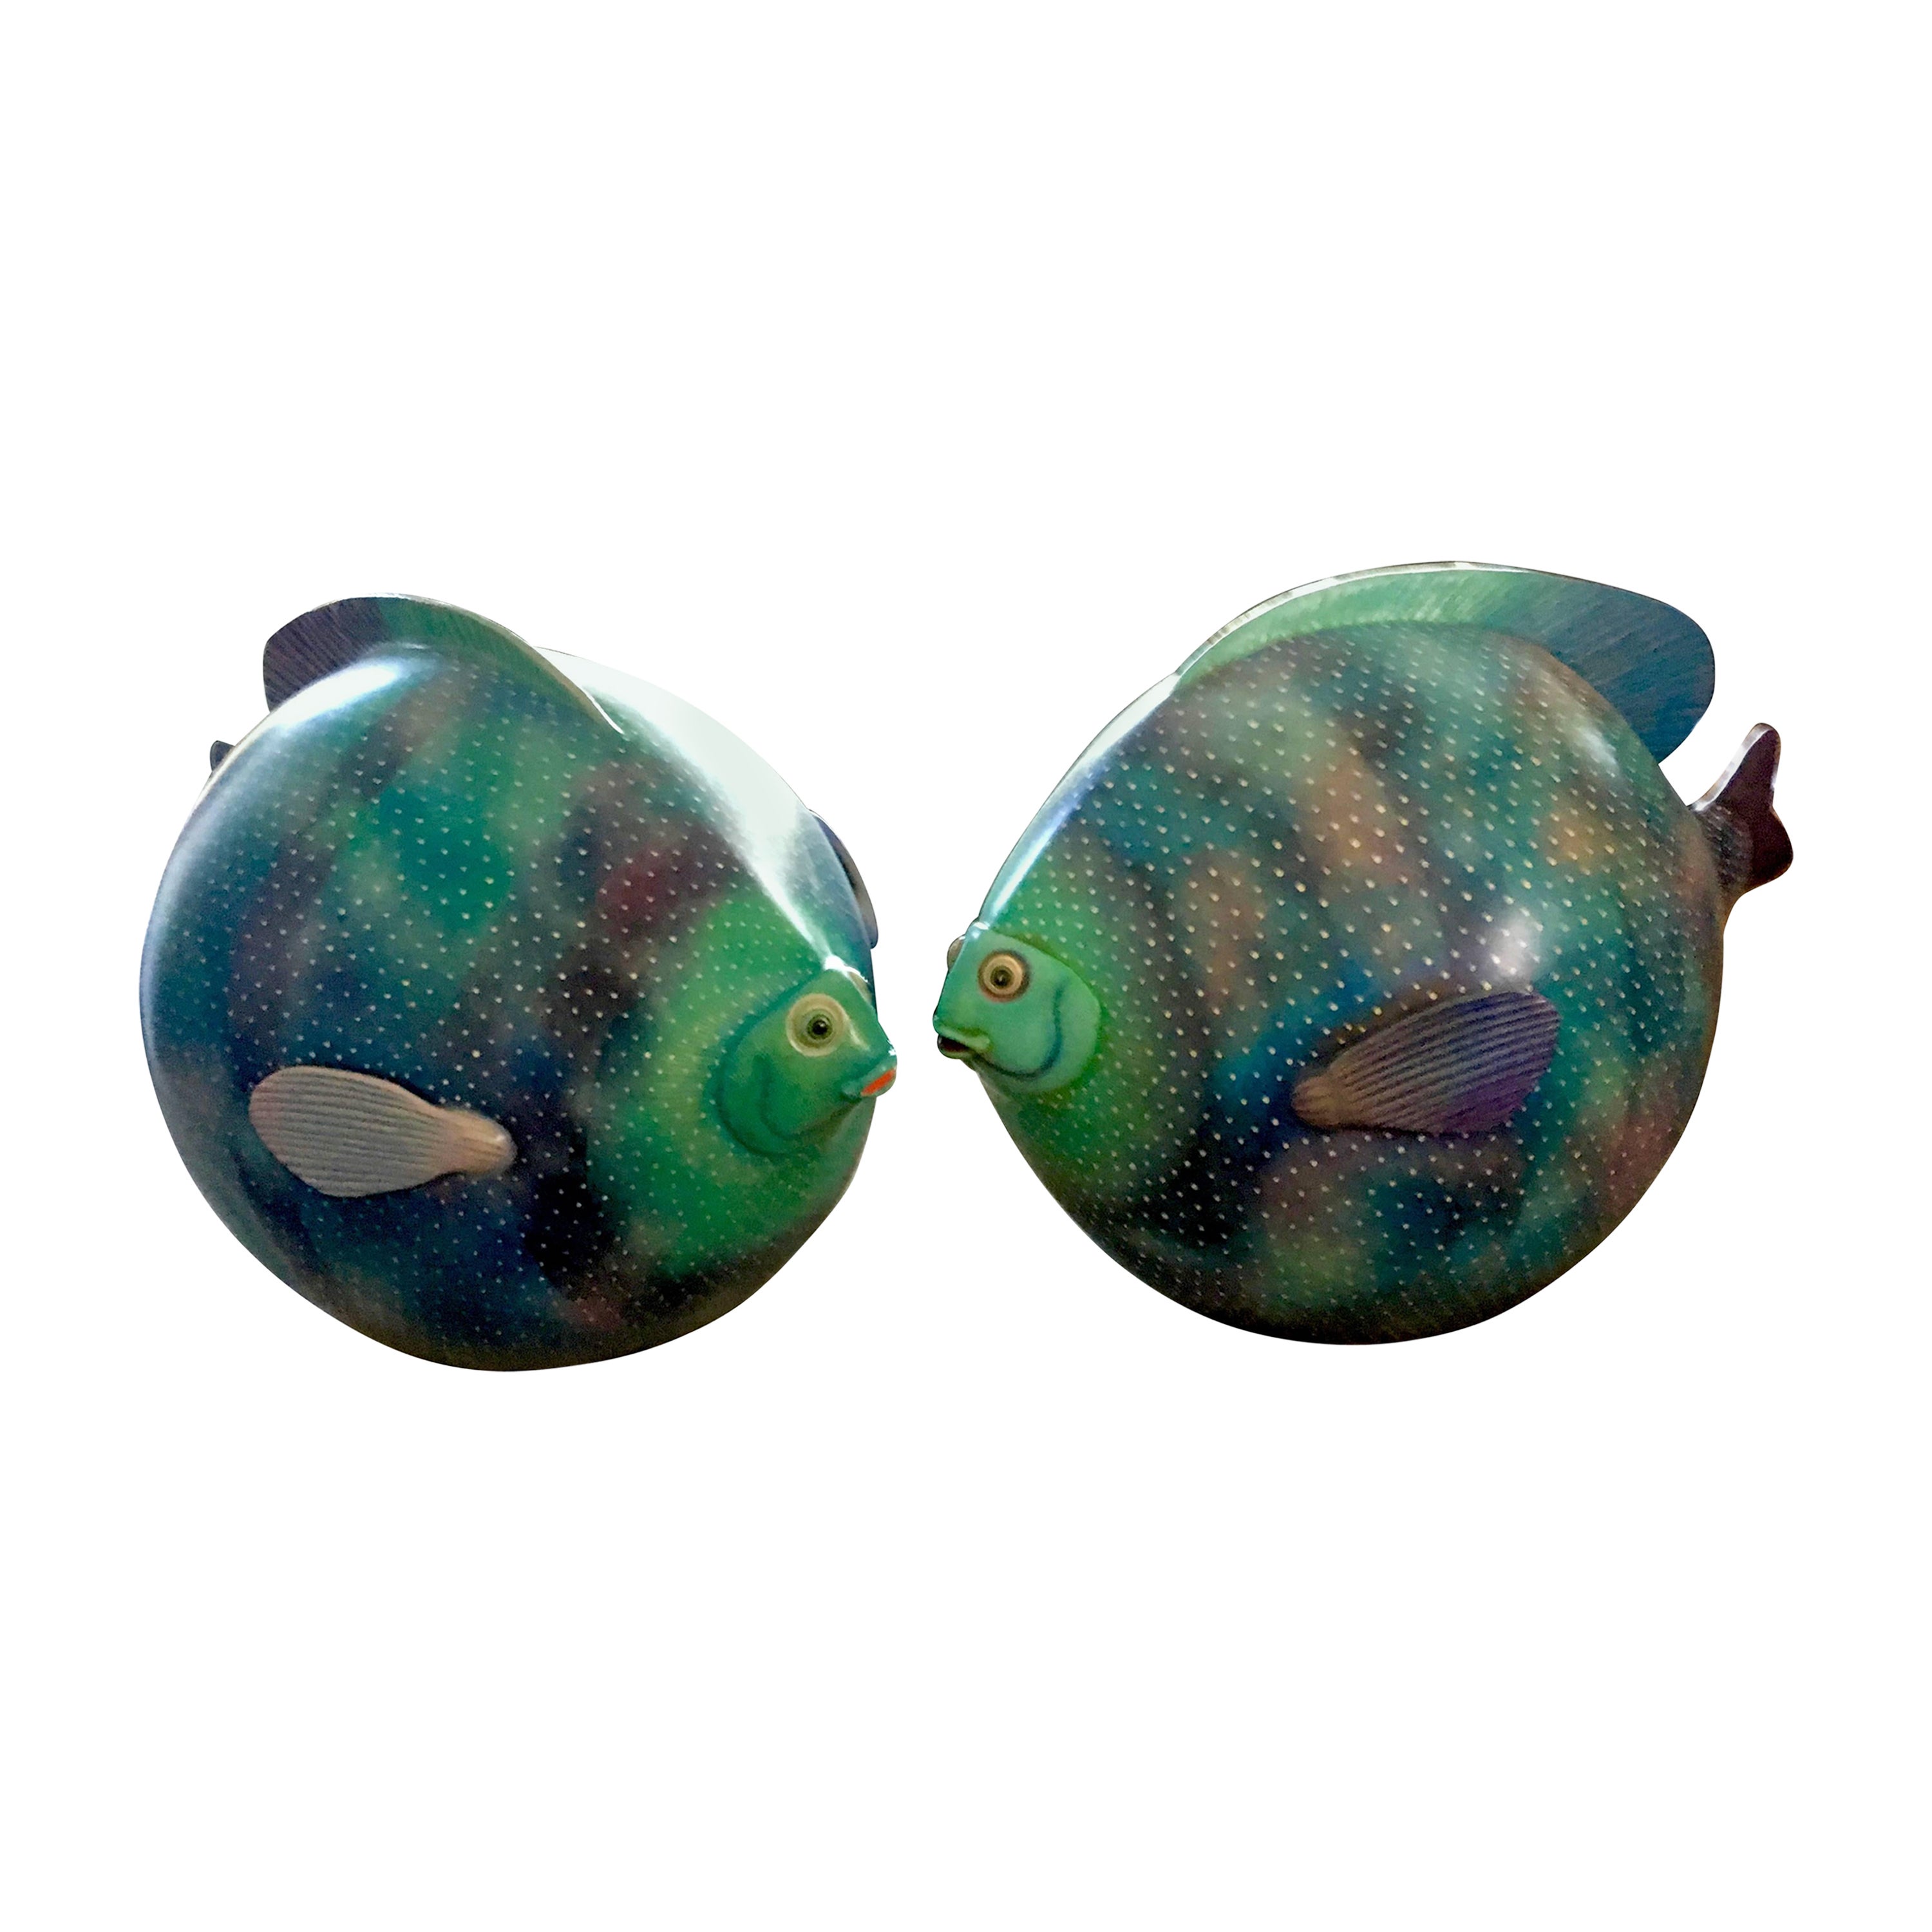 Pair of Signed Ceramic Fish Sculpture by Mexican Artist Sergio Bustamante For Sale